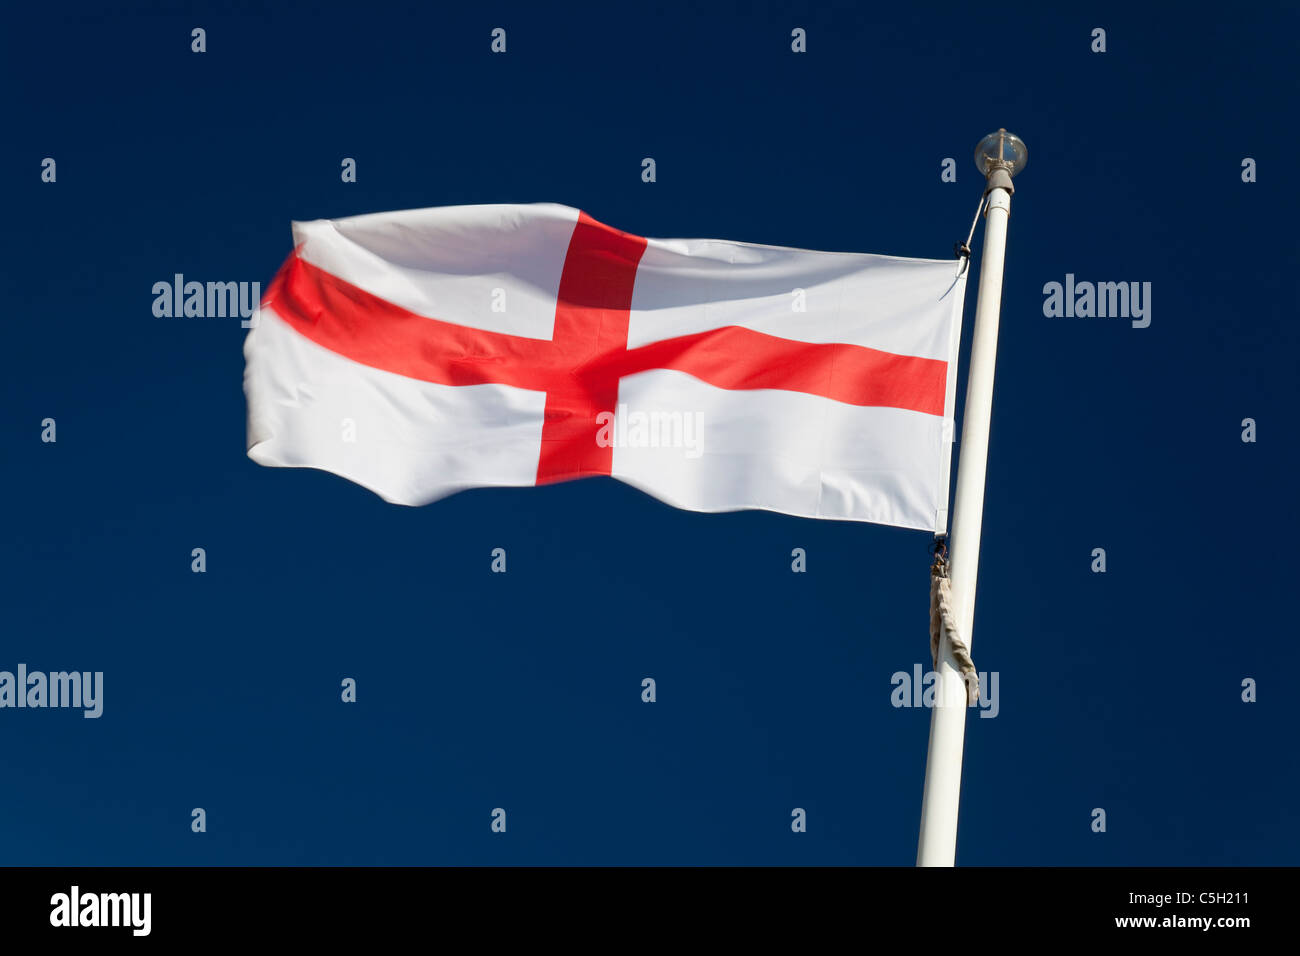 Flag of St George (National flag of England) Stock Photo